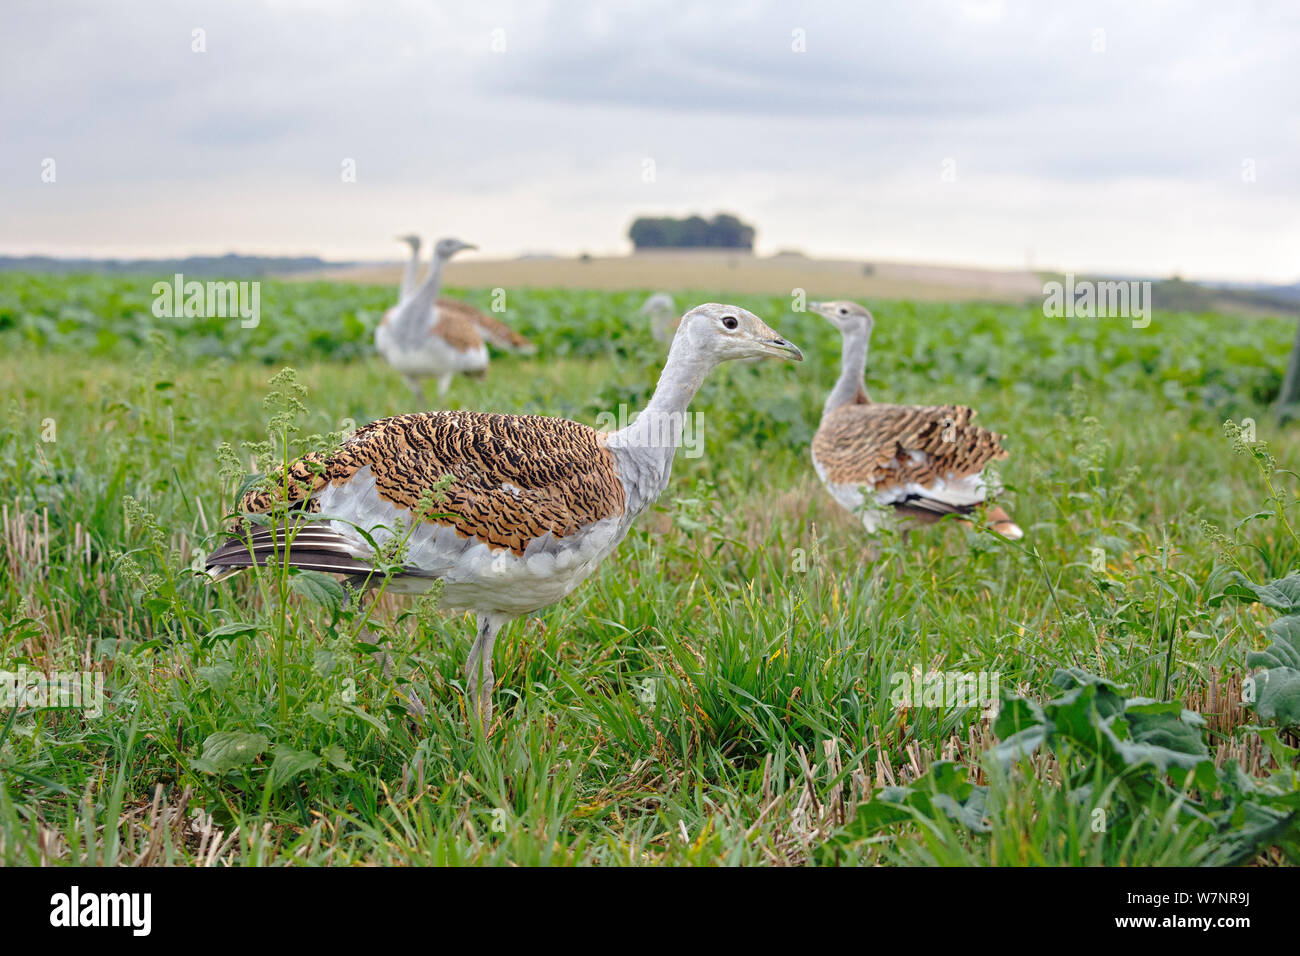 Great Bustard (Otis tarda) juvenile, part of a reintroduction project with birds imported under DEFRA licence from Russia. Salisbury Plain, Wiltshire, UK, September 2012 Stock Photo